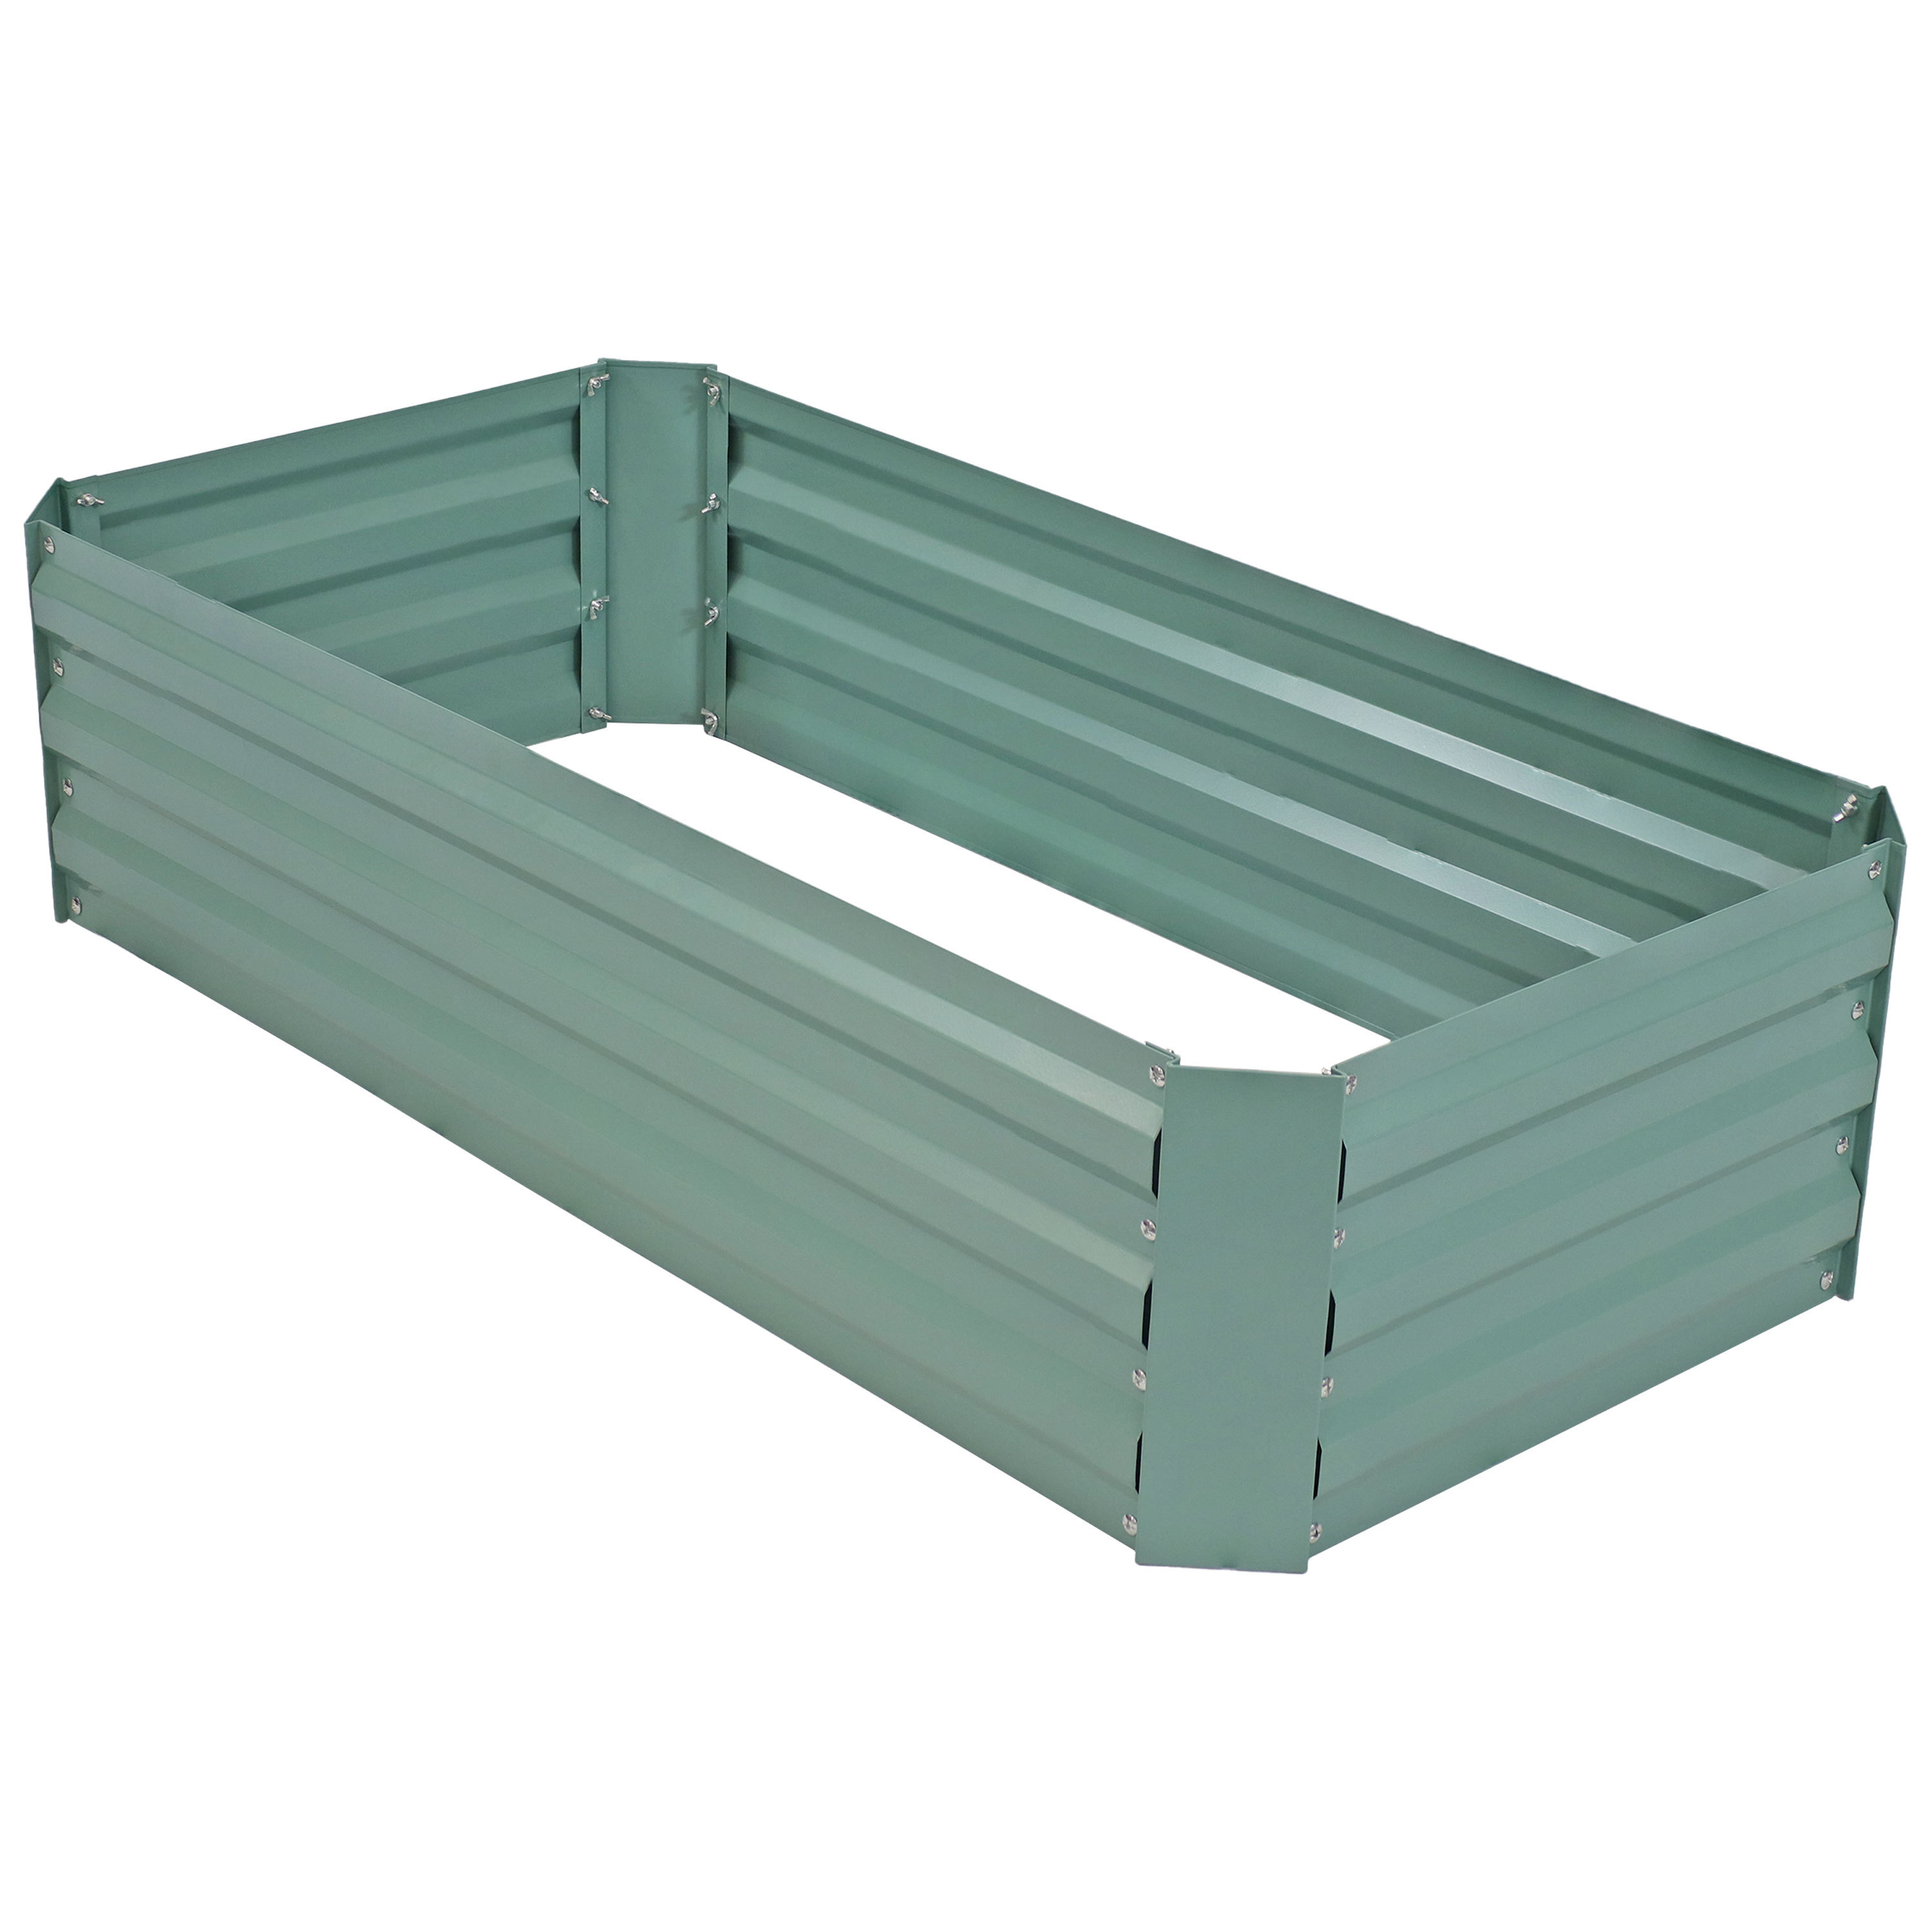 Rectangle Steel Raised Planter Bed - 4 x 2 ft - Green